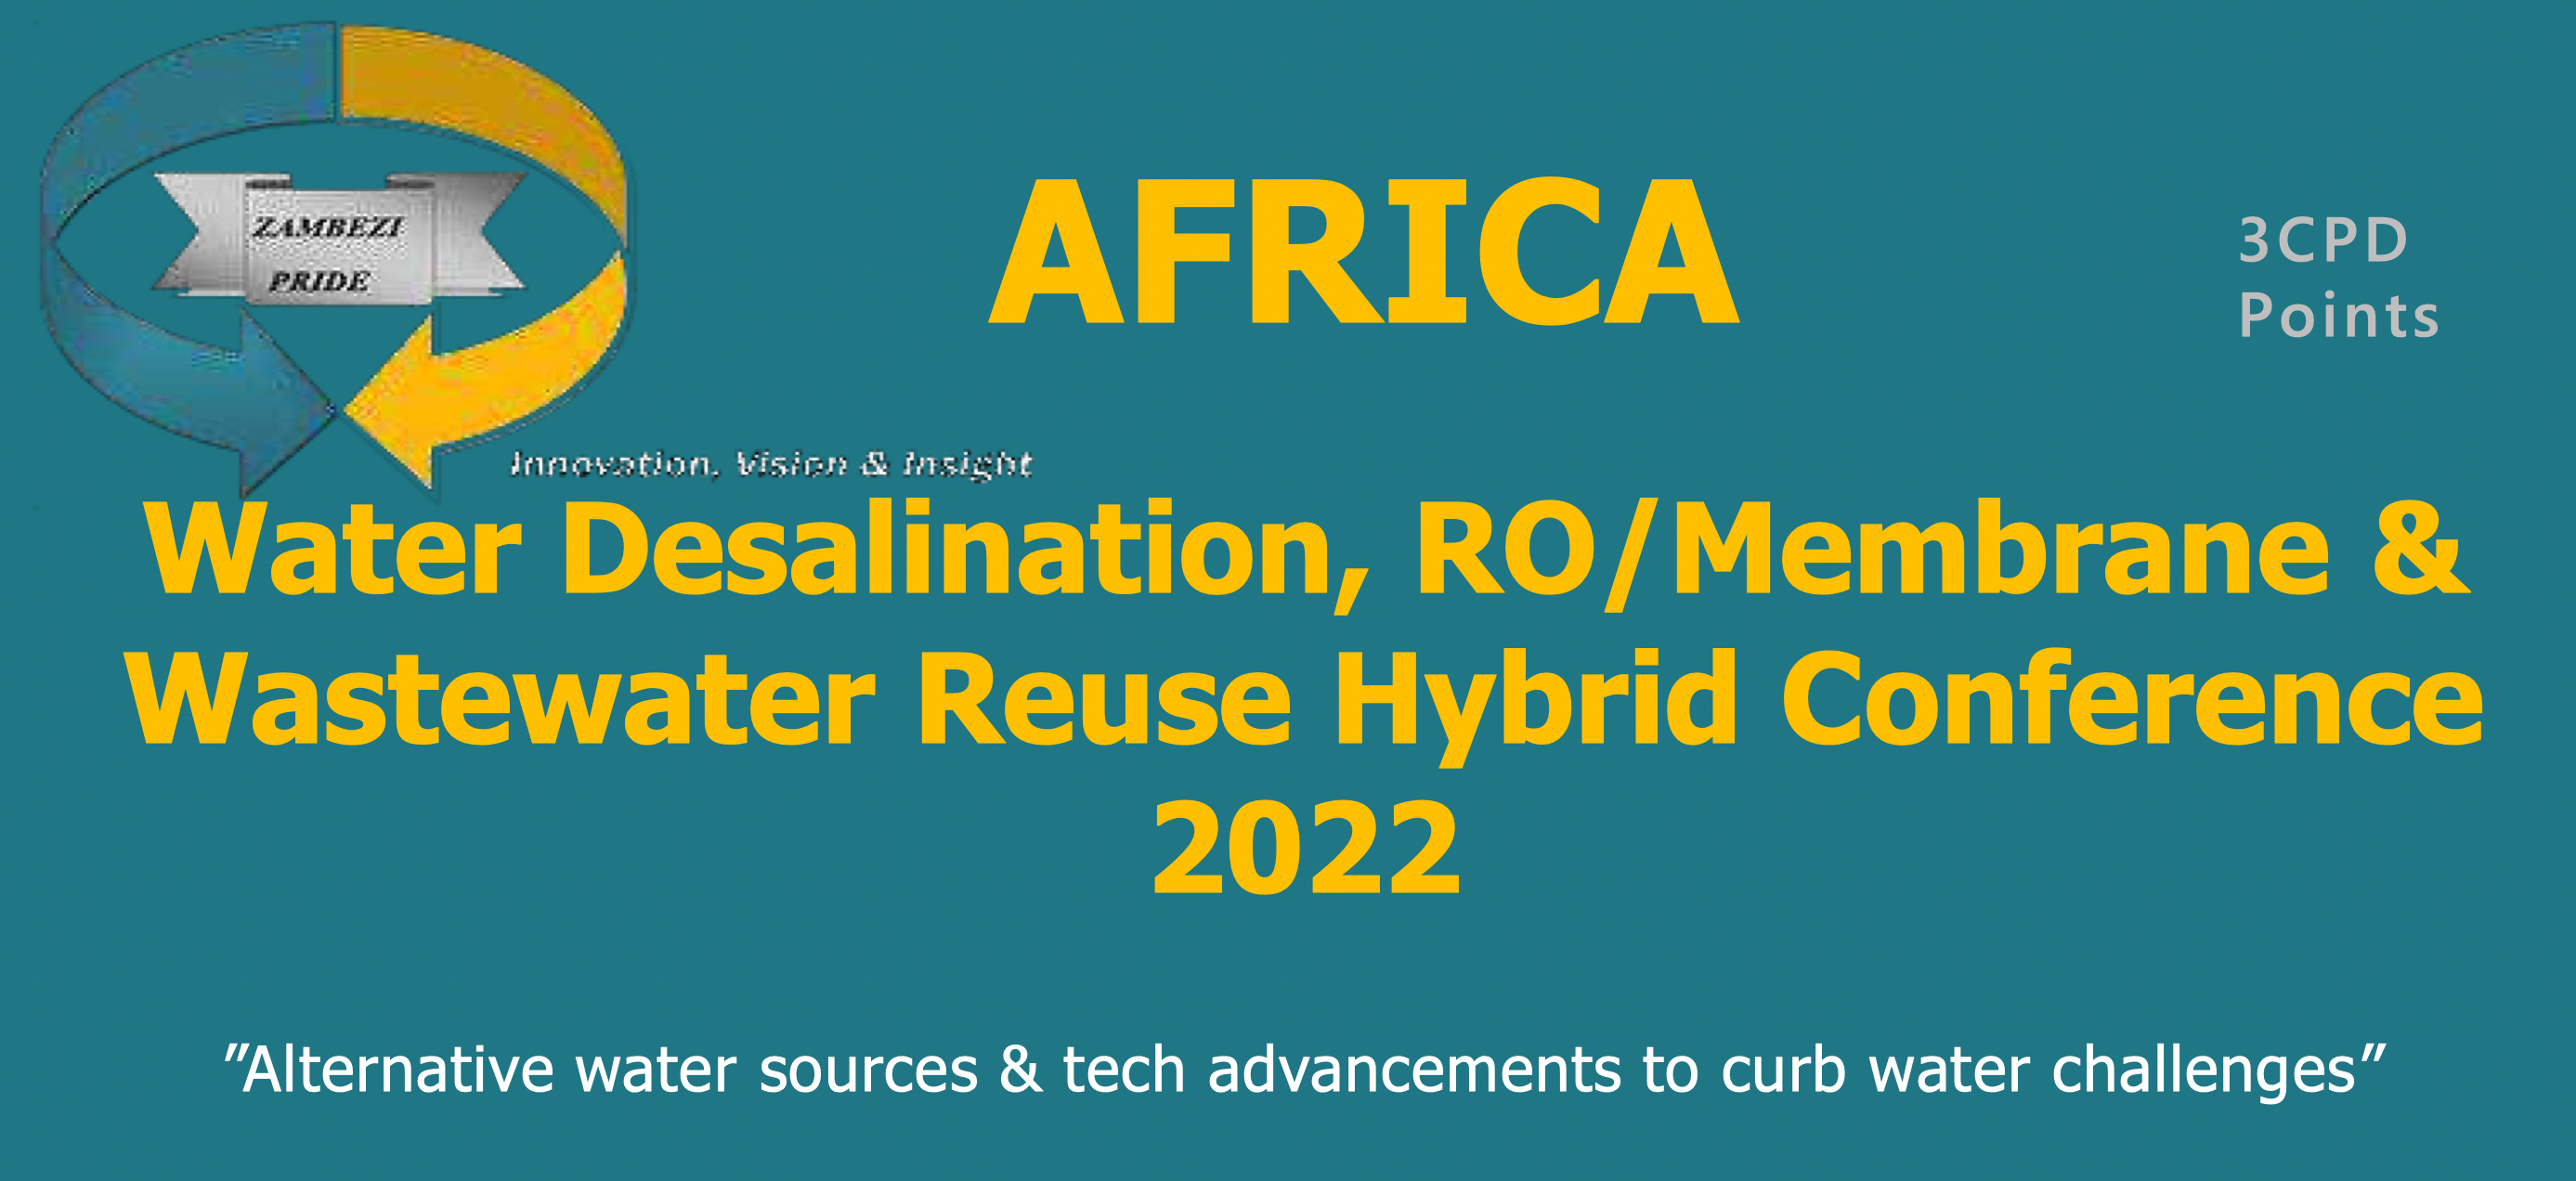 6th annual Water Desalination, RO/Membrane & Wastewater Reuse